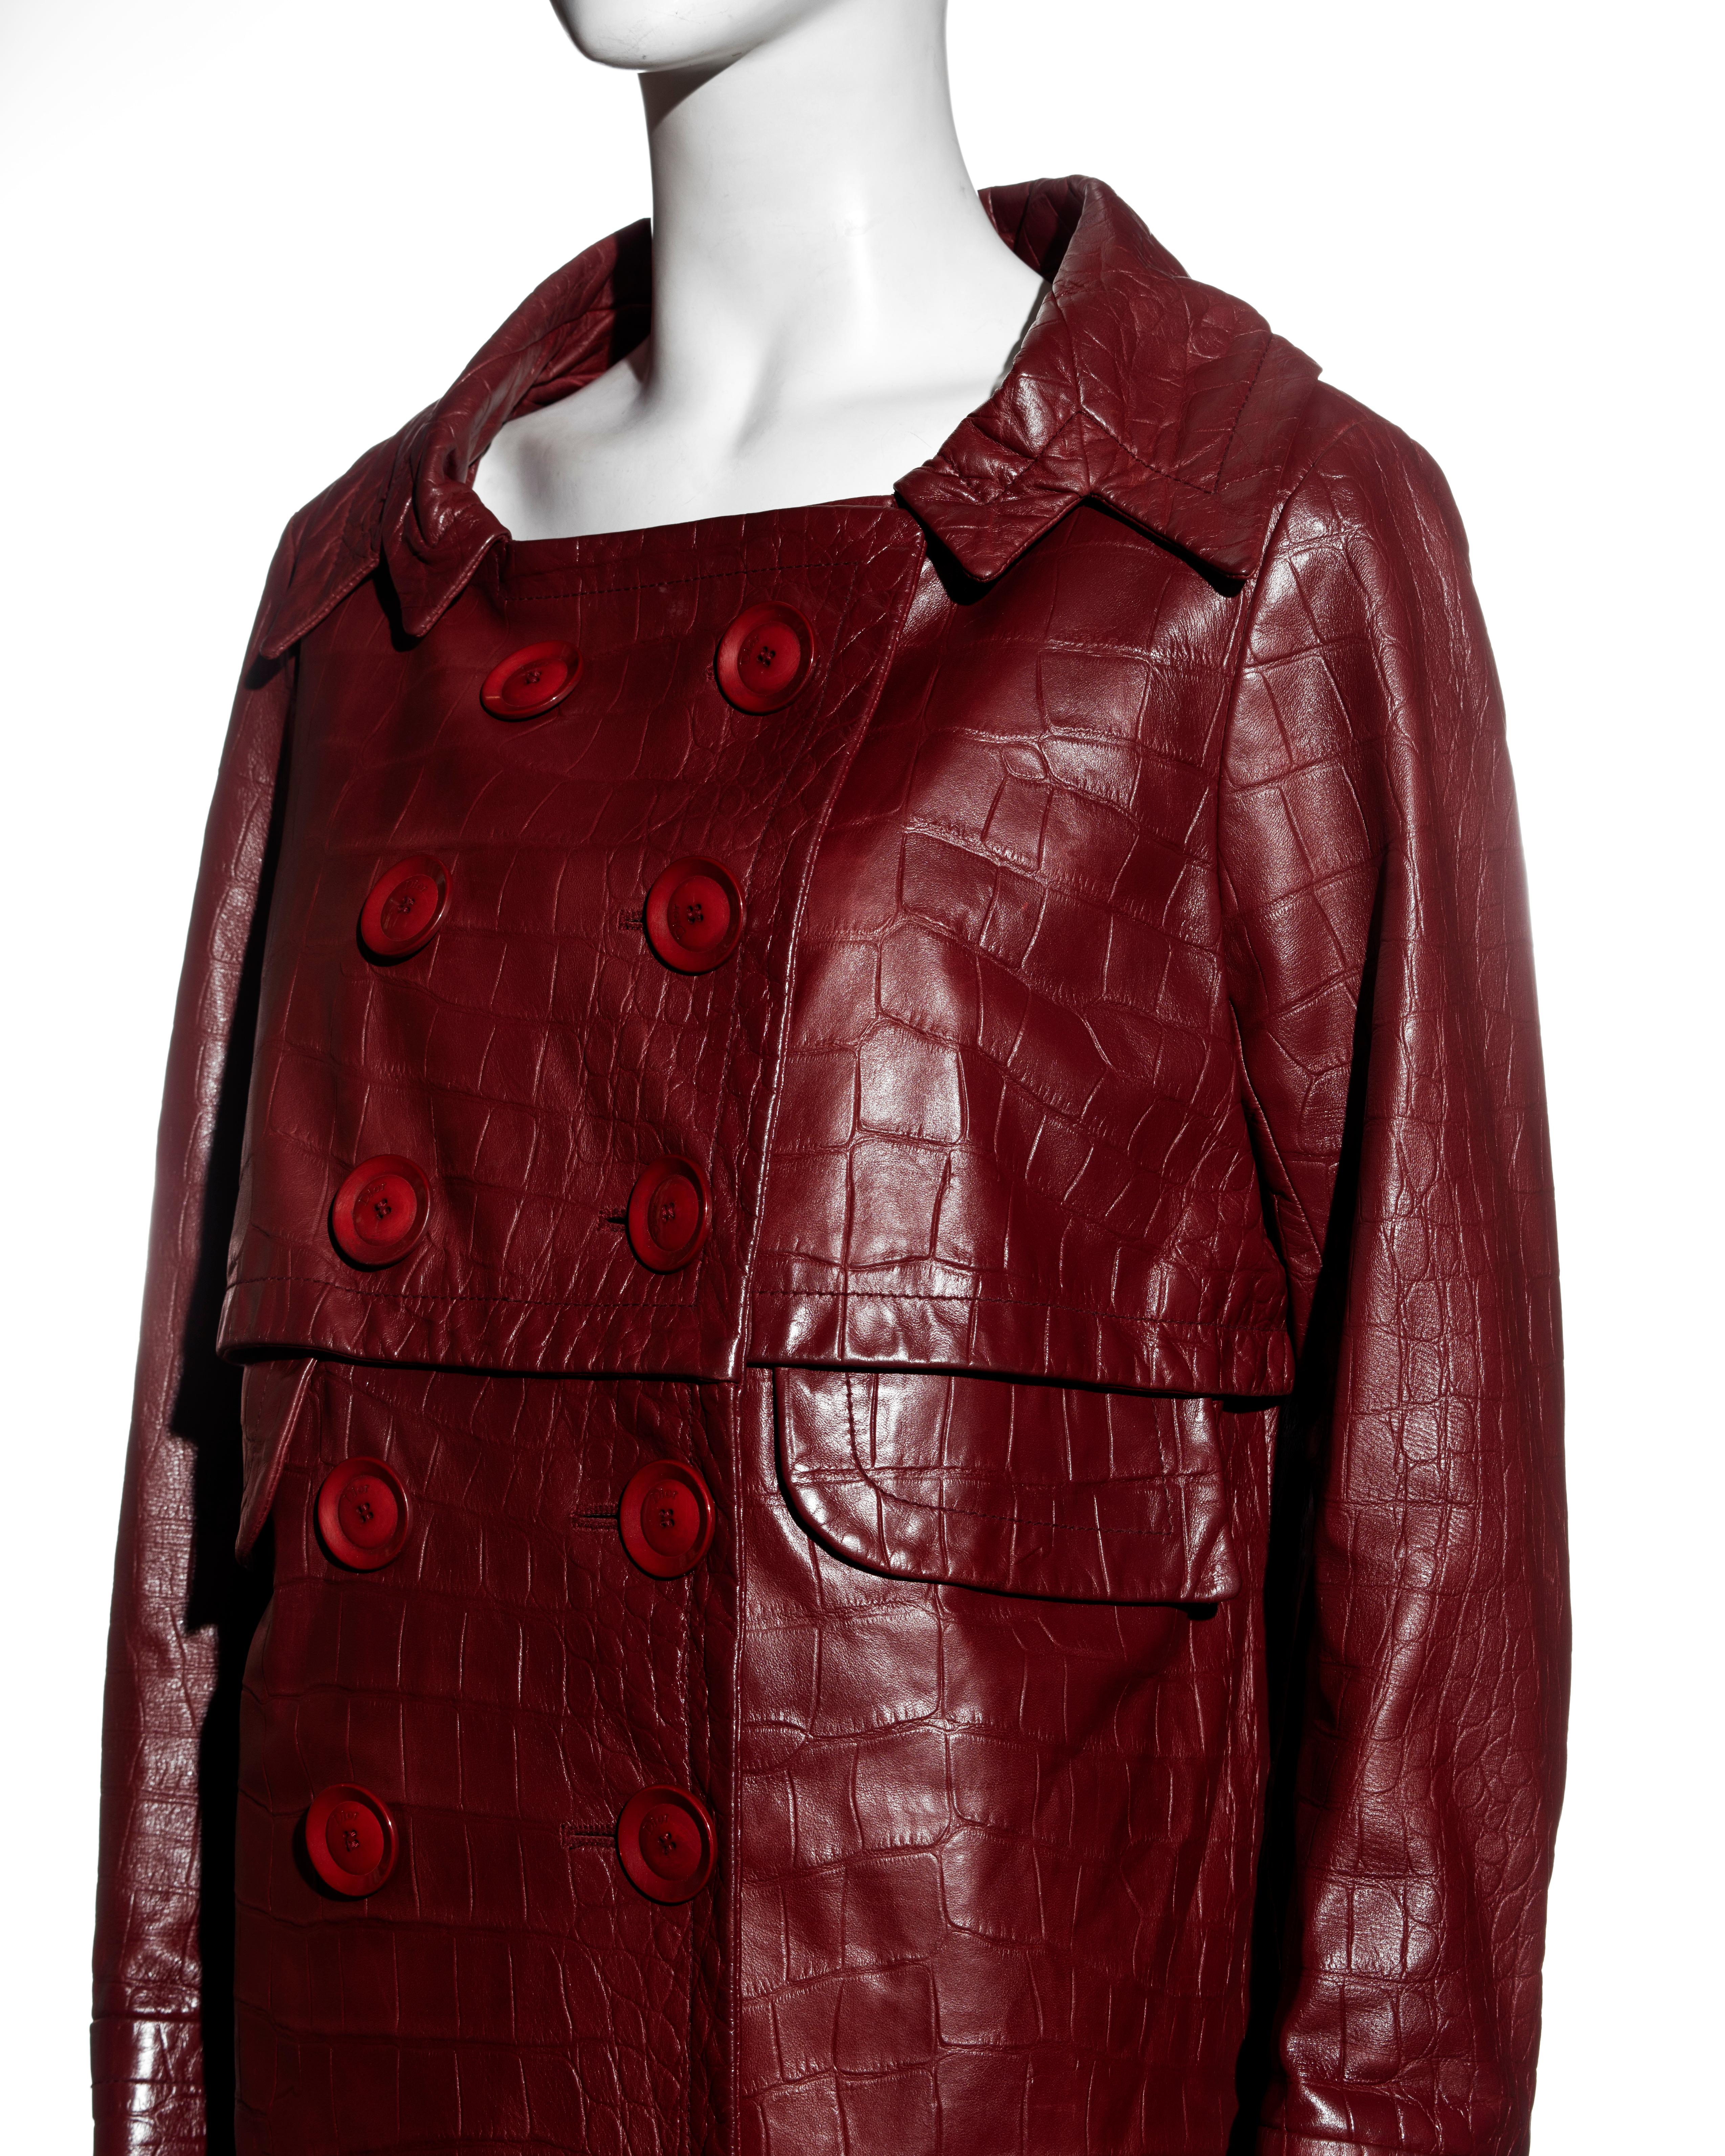 Christian Dior by John Galliano red croc-embossed lambskin leather coat, fw 2005 For Sale 2